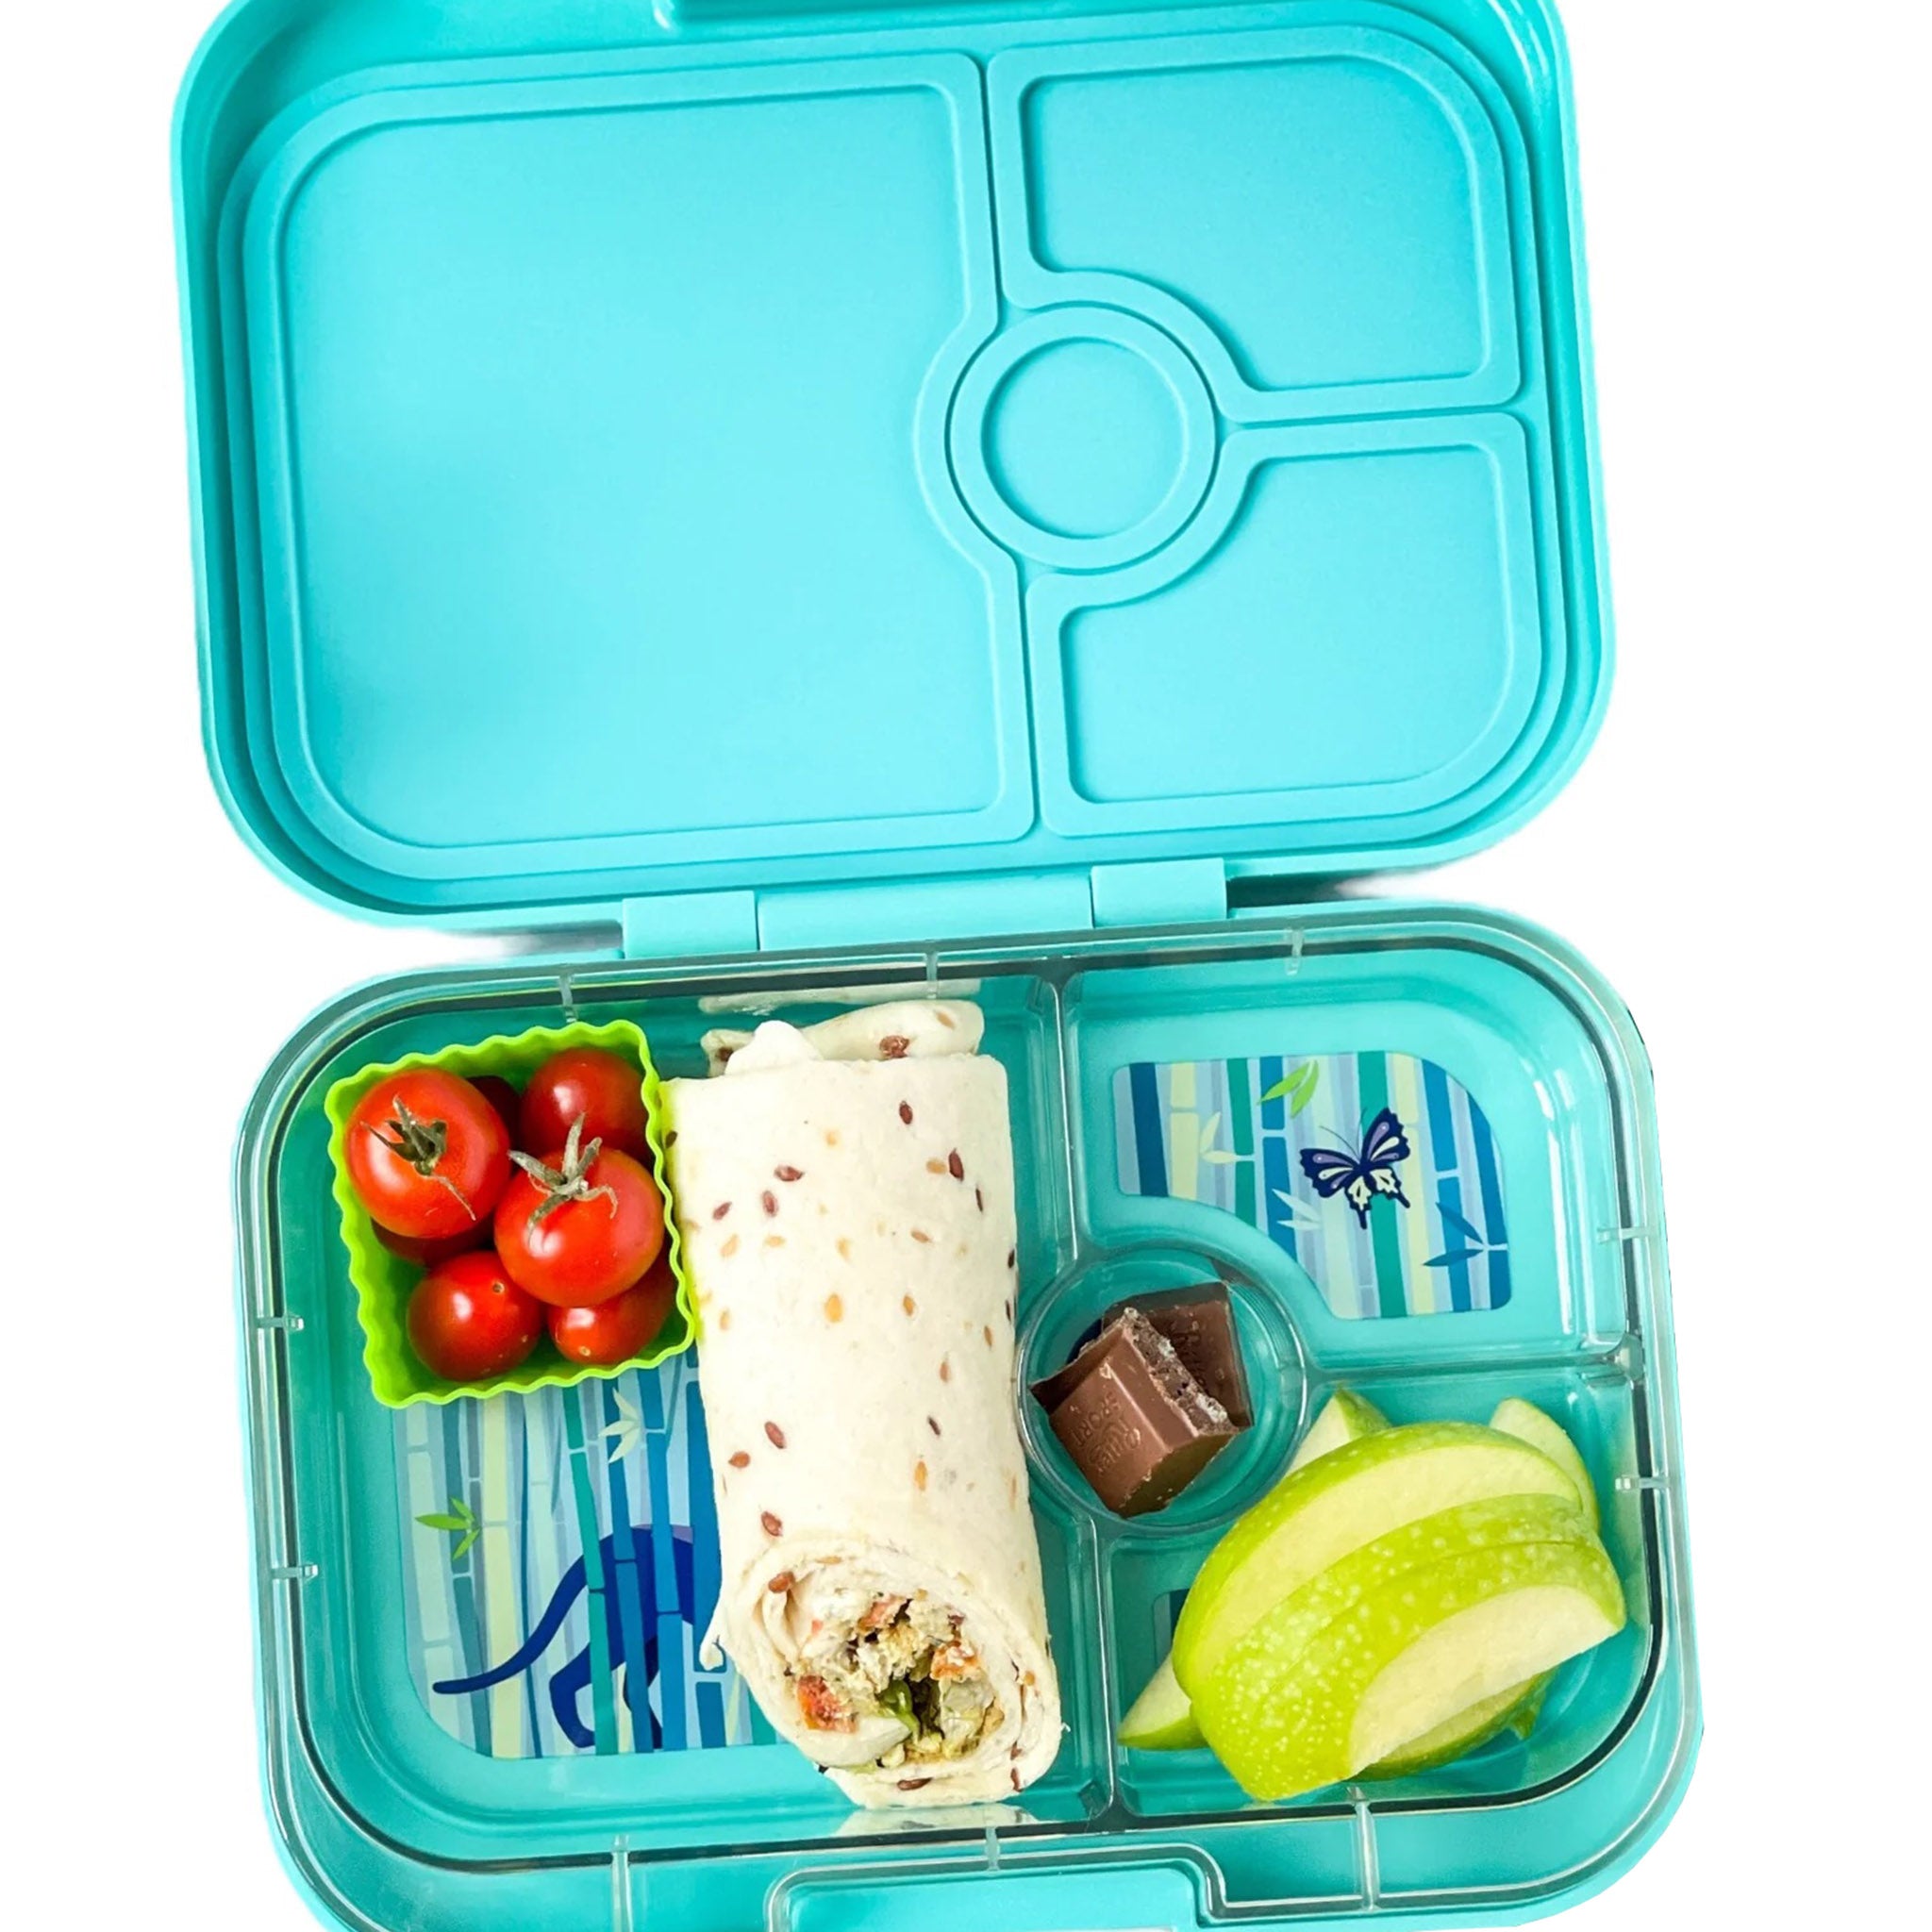 4 Compartment Lunch Box Food Container Bento Storage Box For